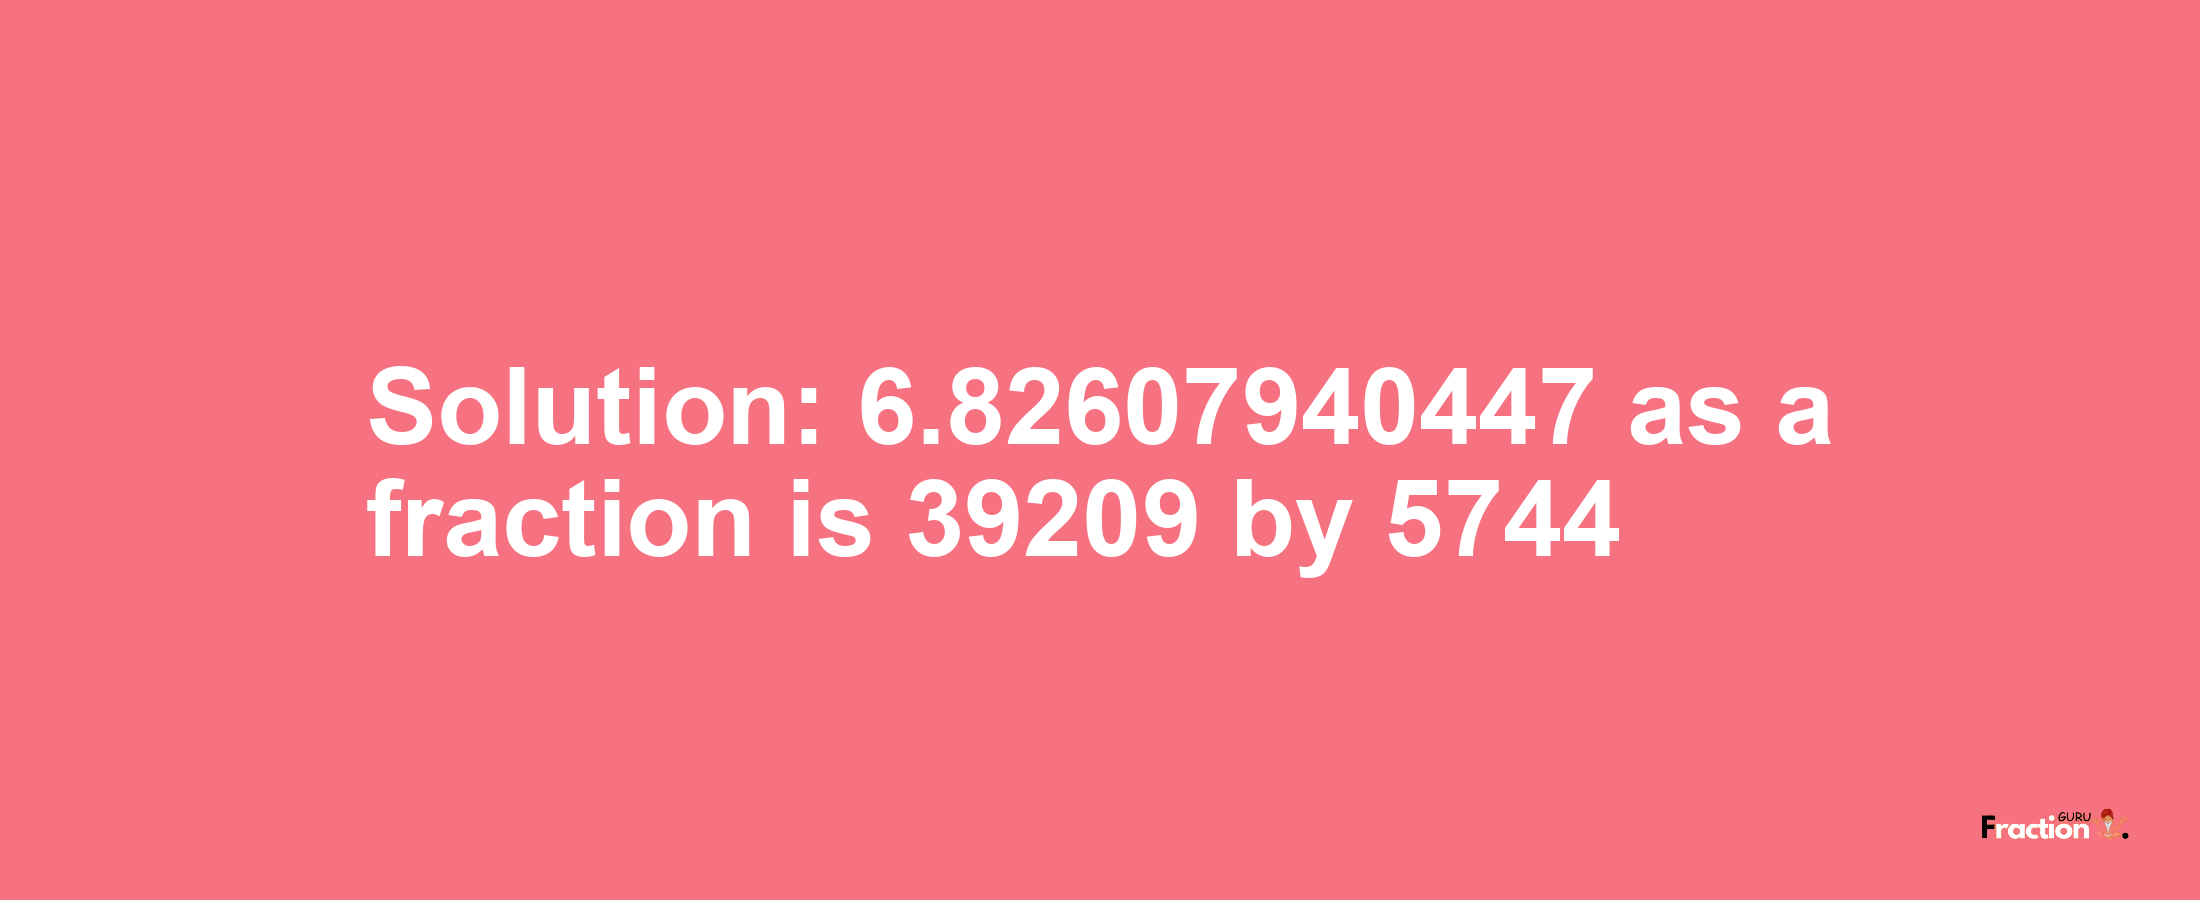 Solution:6.82607940447 as a fraction is 39209/5744